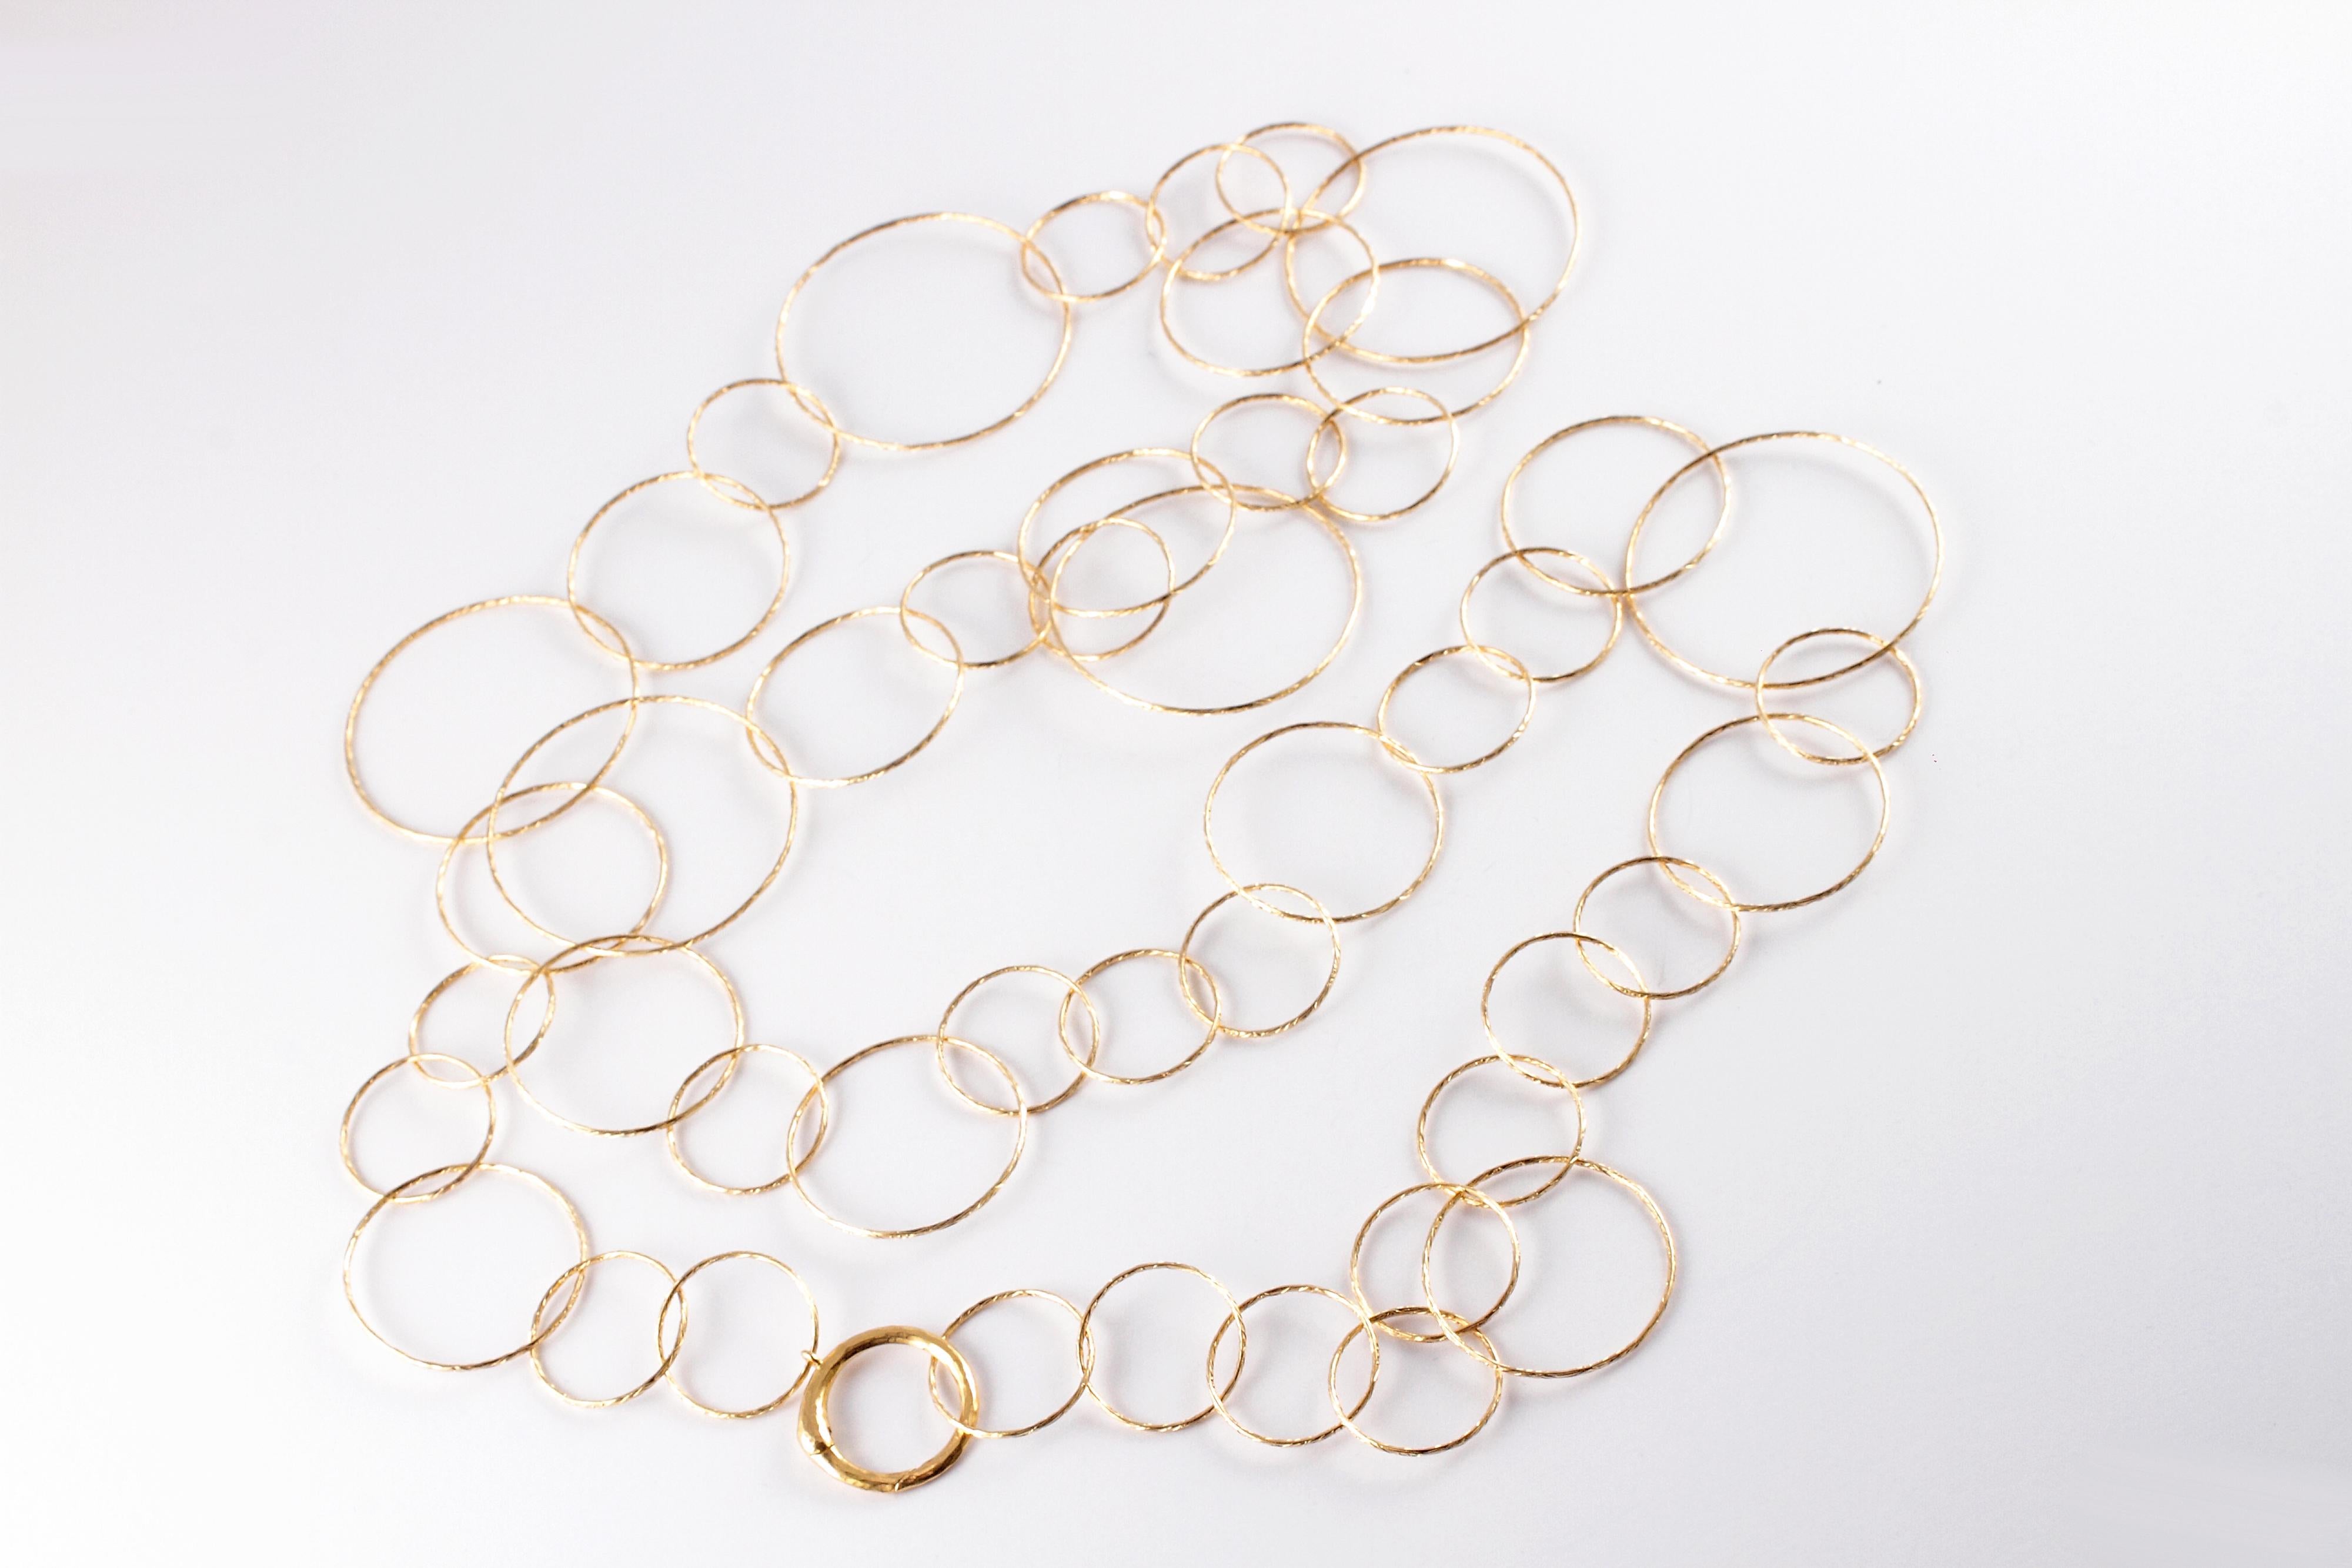 Talk about a timeless treasure from Tiffany & Co. and Paloma Picasso.  This lovely necklace is composed of circular, free-form, interlocking links and measures approximately 46